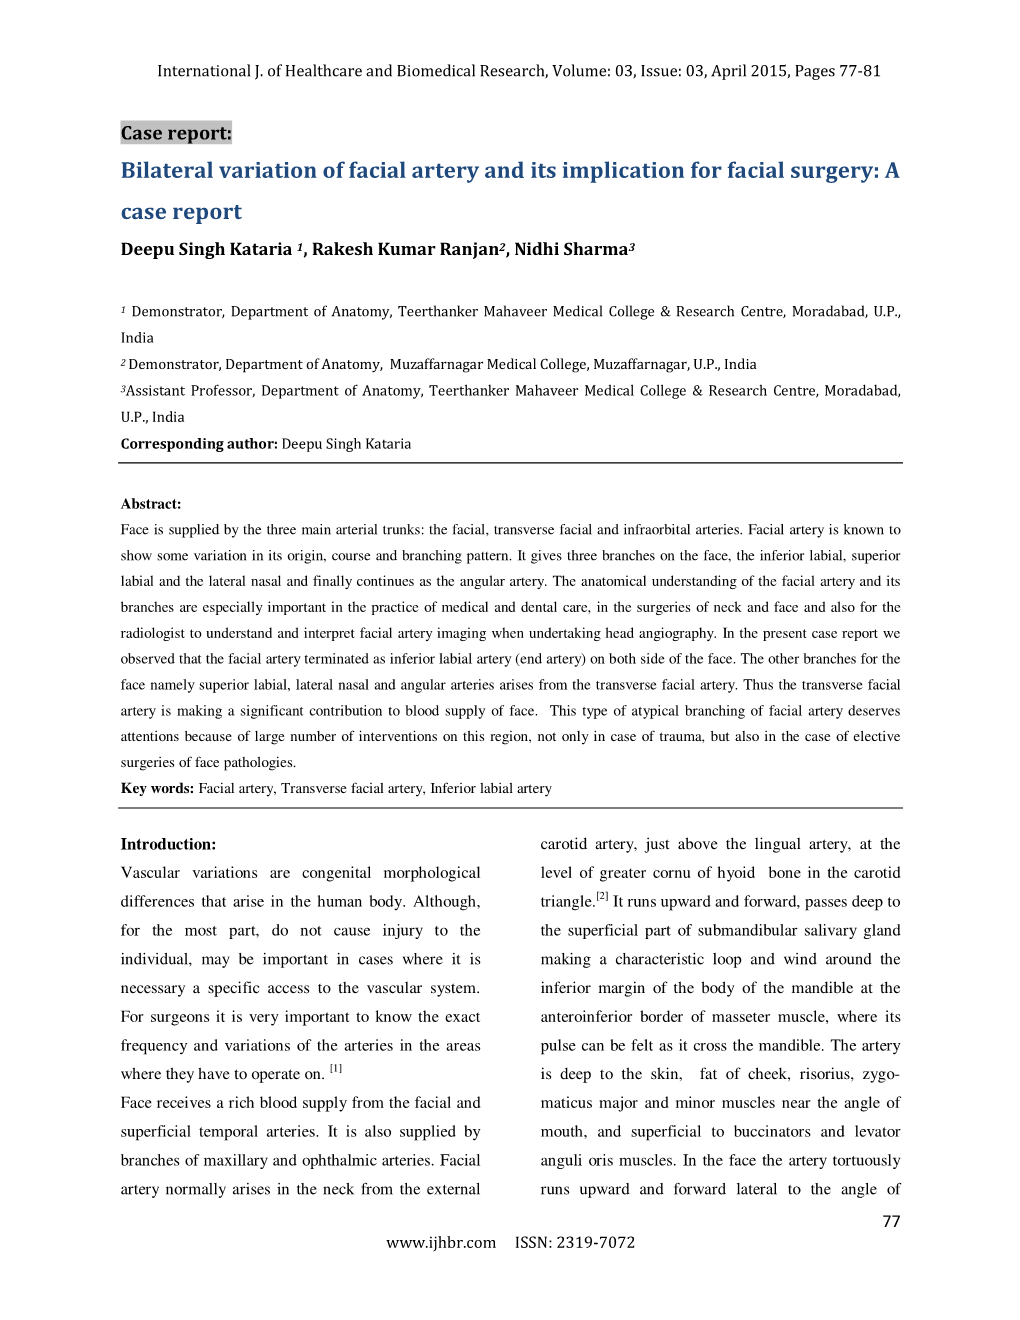 Bilateral Variation of Facial Artery and Its Implication for Facial Surgery: a Case Report